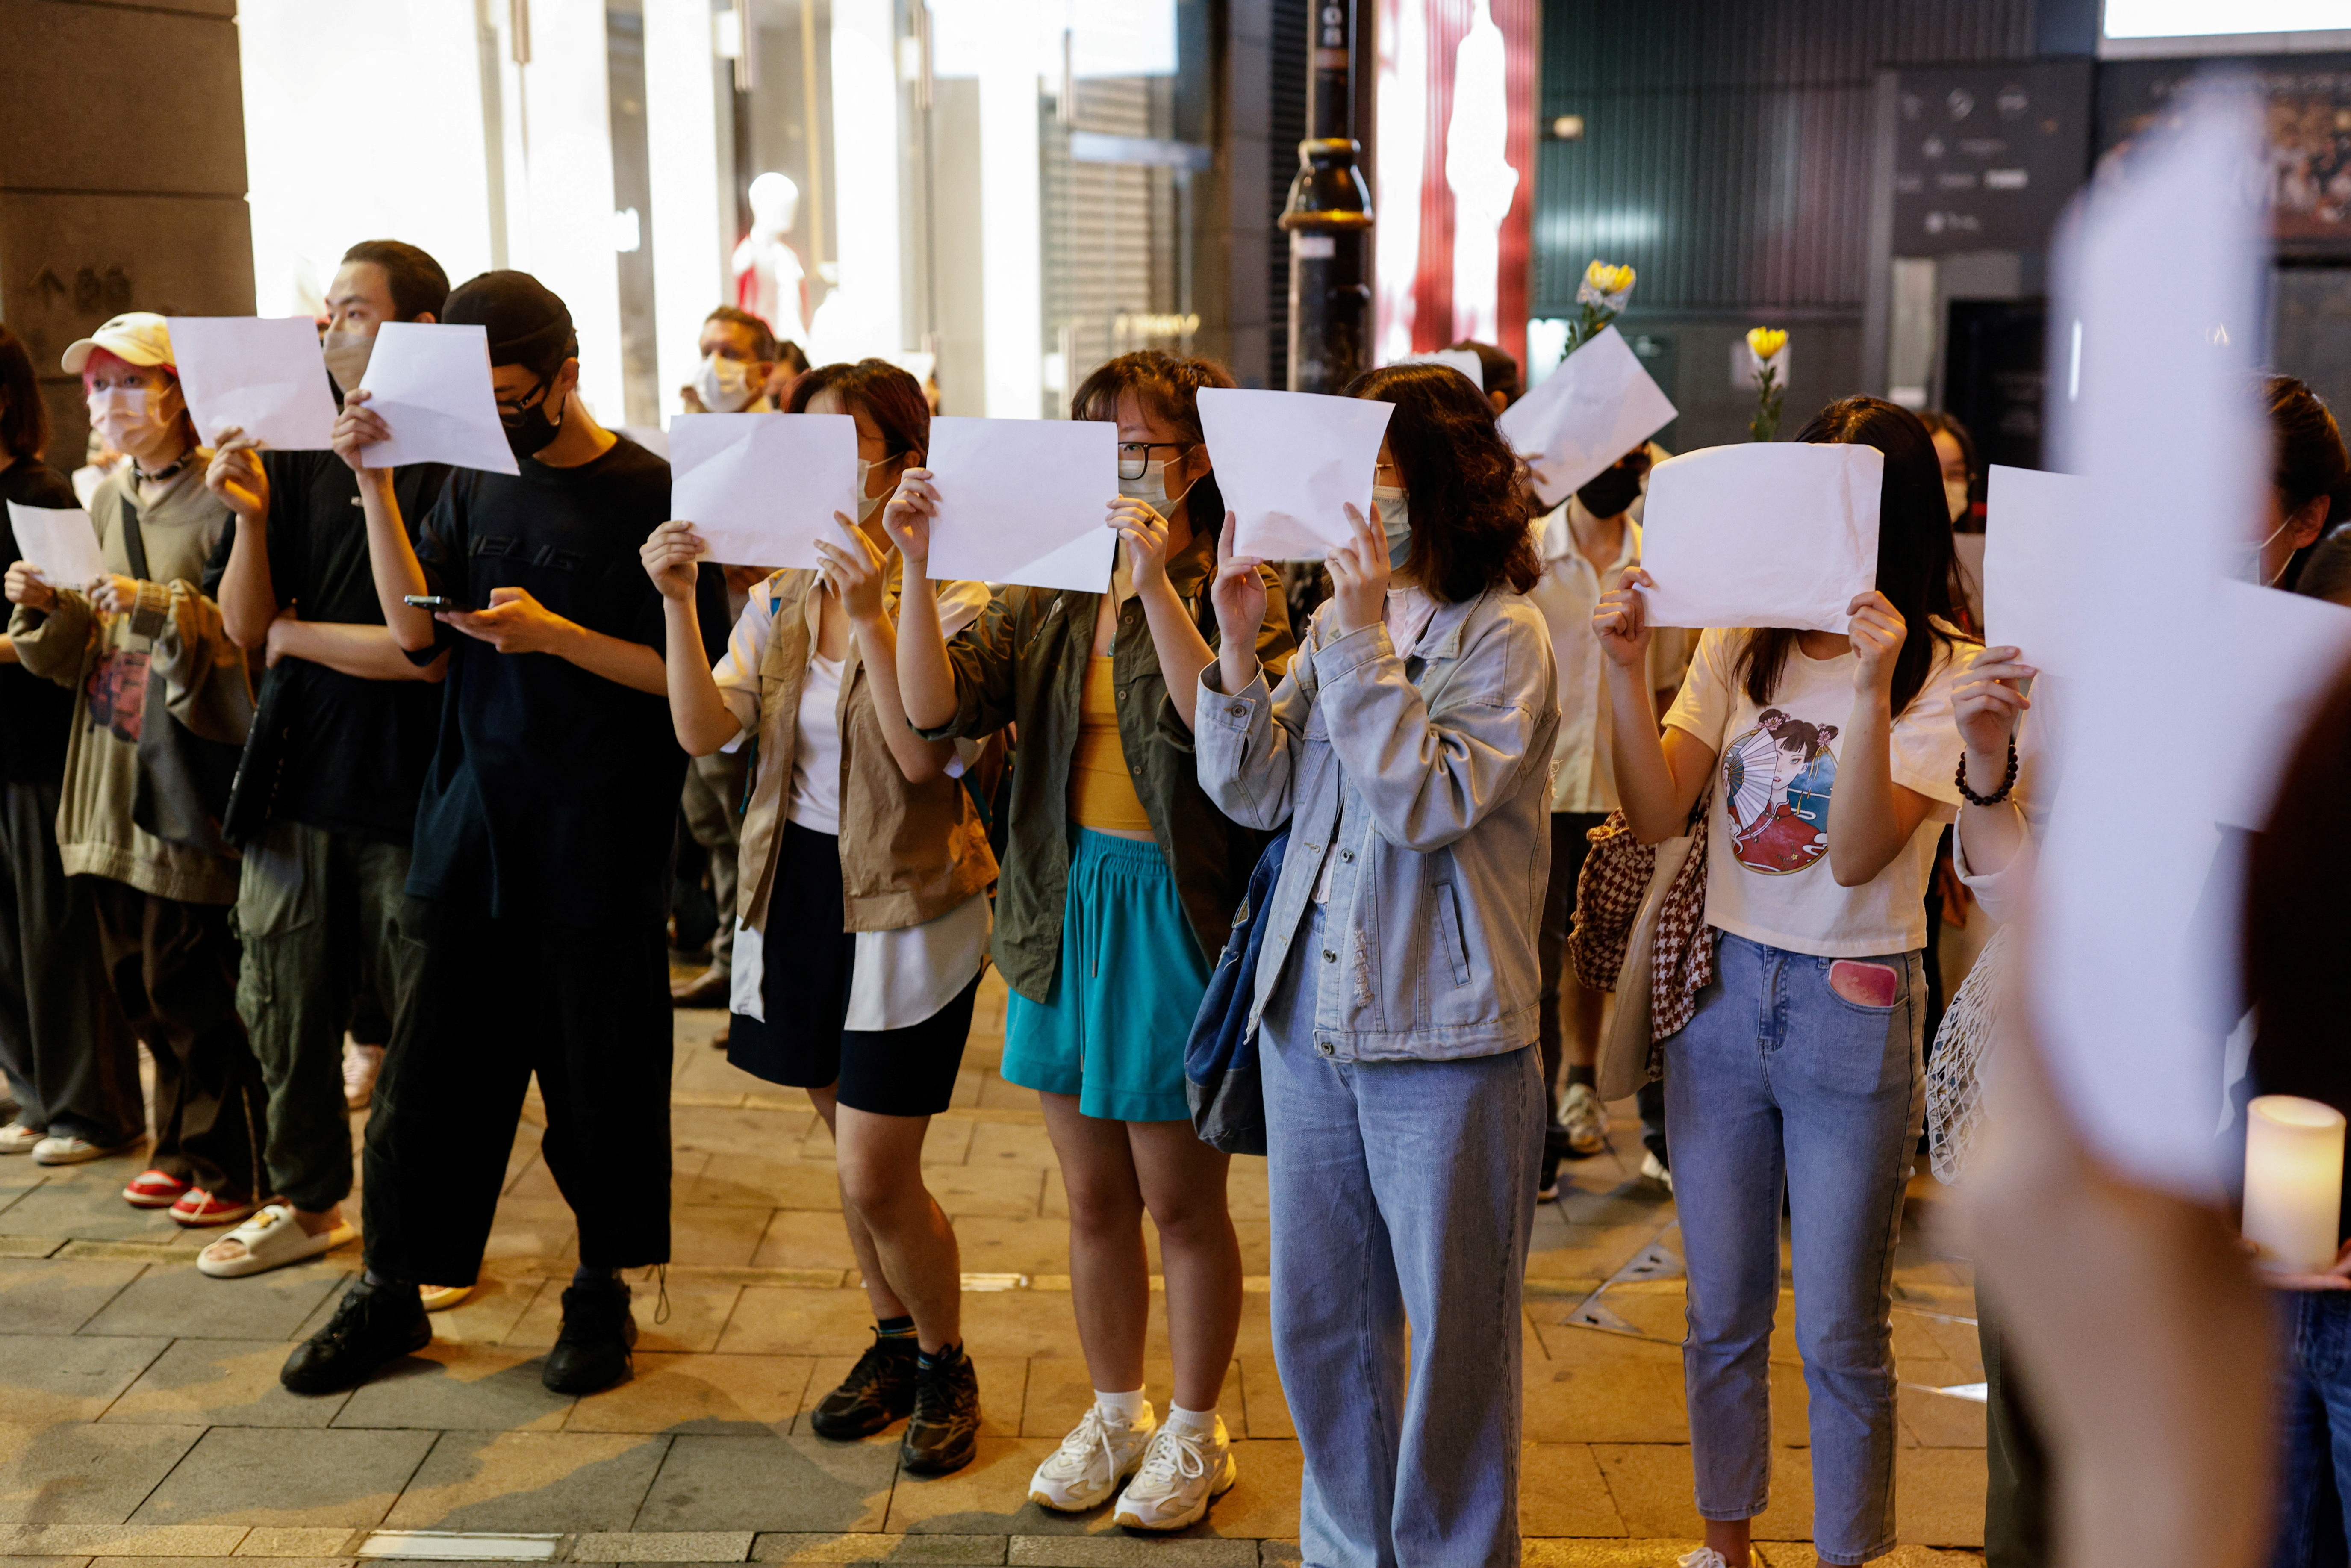 People hold sheets of paper in protest over coronavirus disease (COVID-19) restrictions in mainland China, in Hong Kong